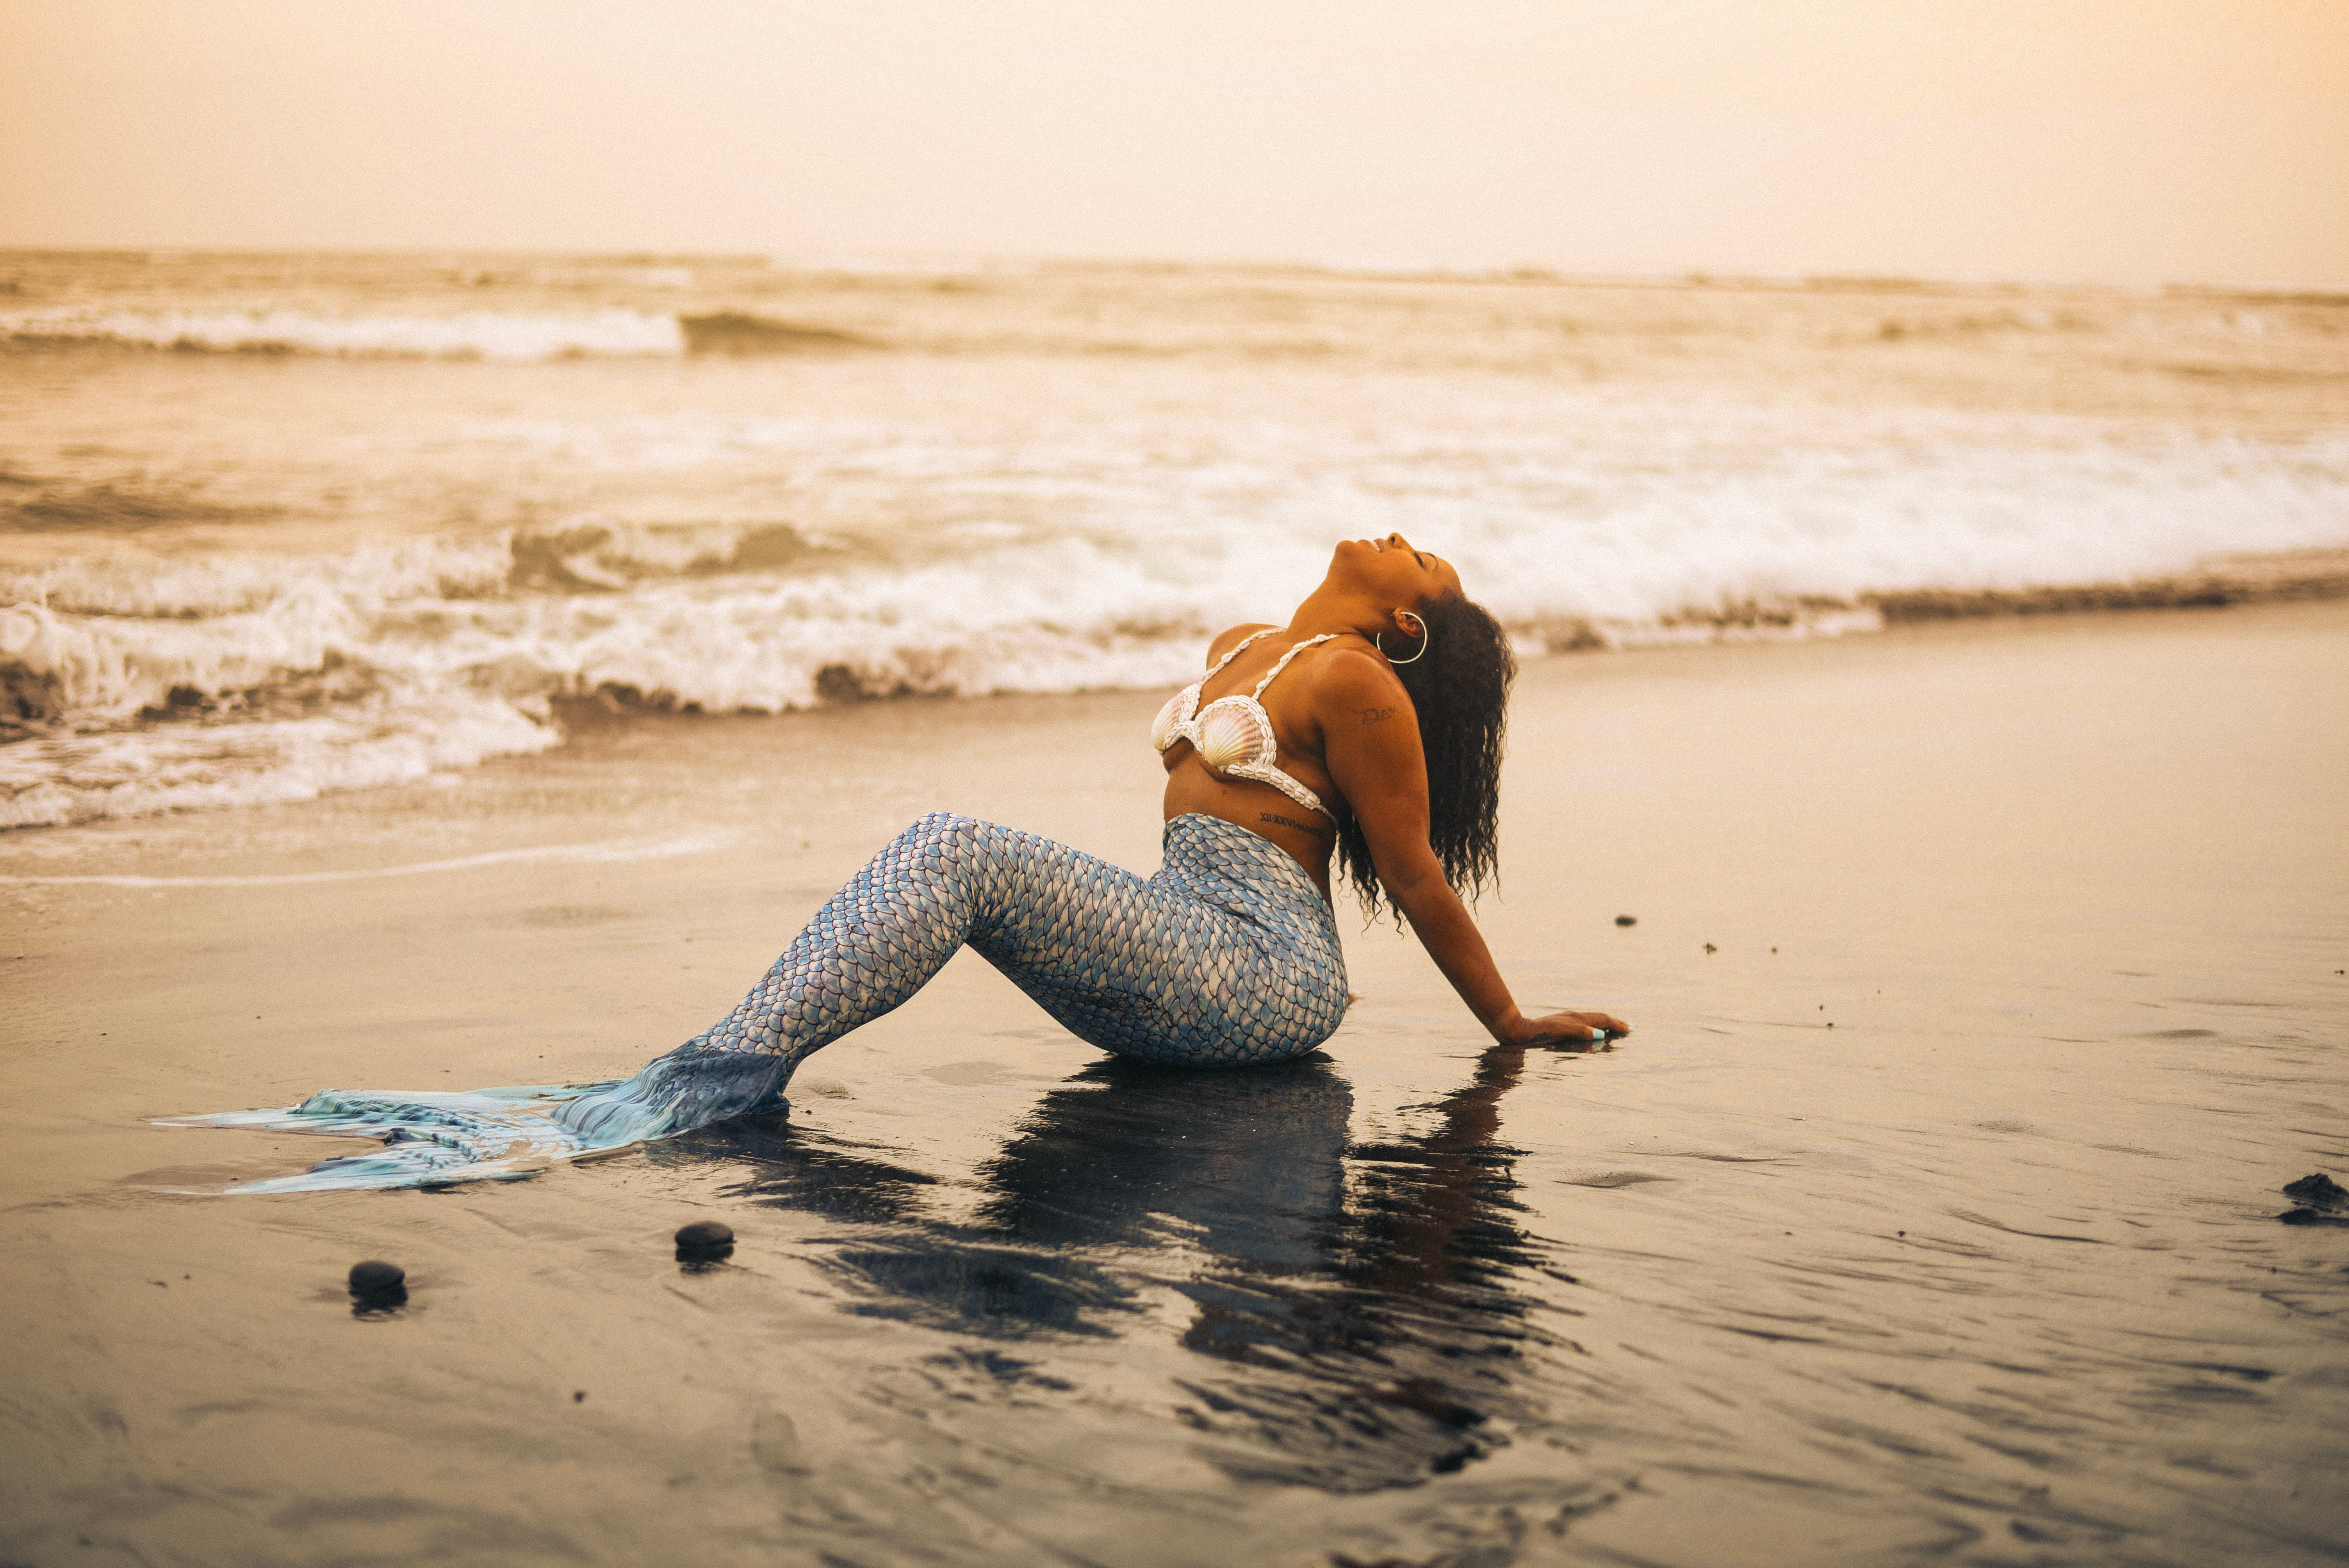 Under The Sea! This Woman's Birthday Photoshoot Proves Black Mermaids Do Exist